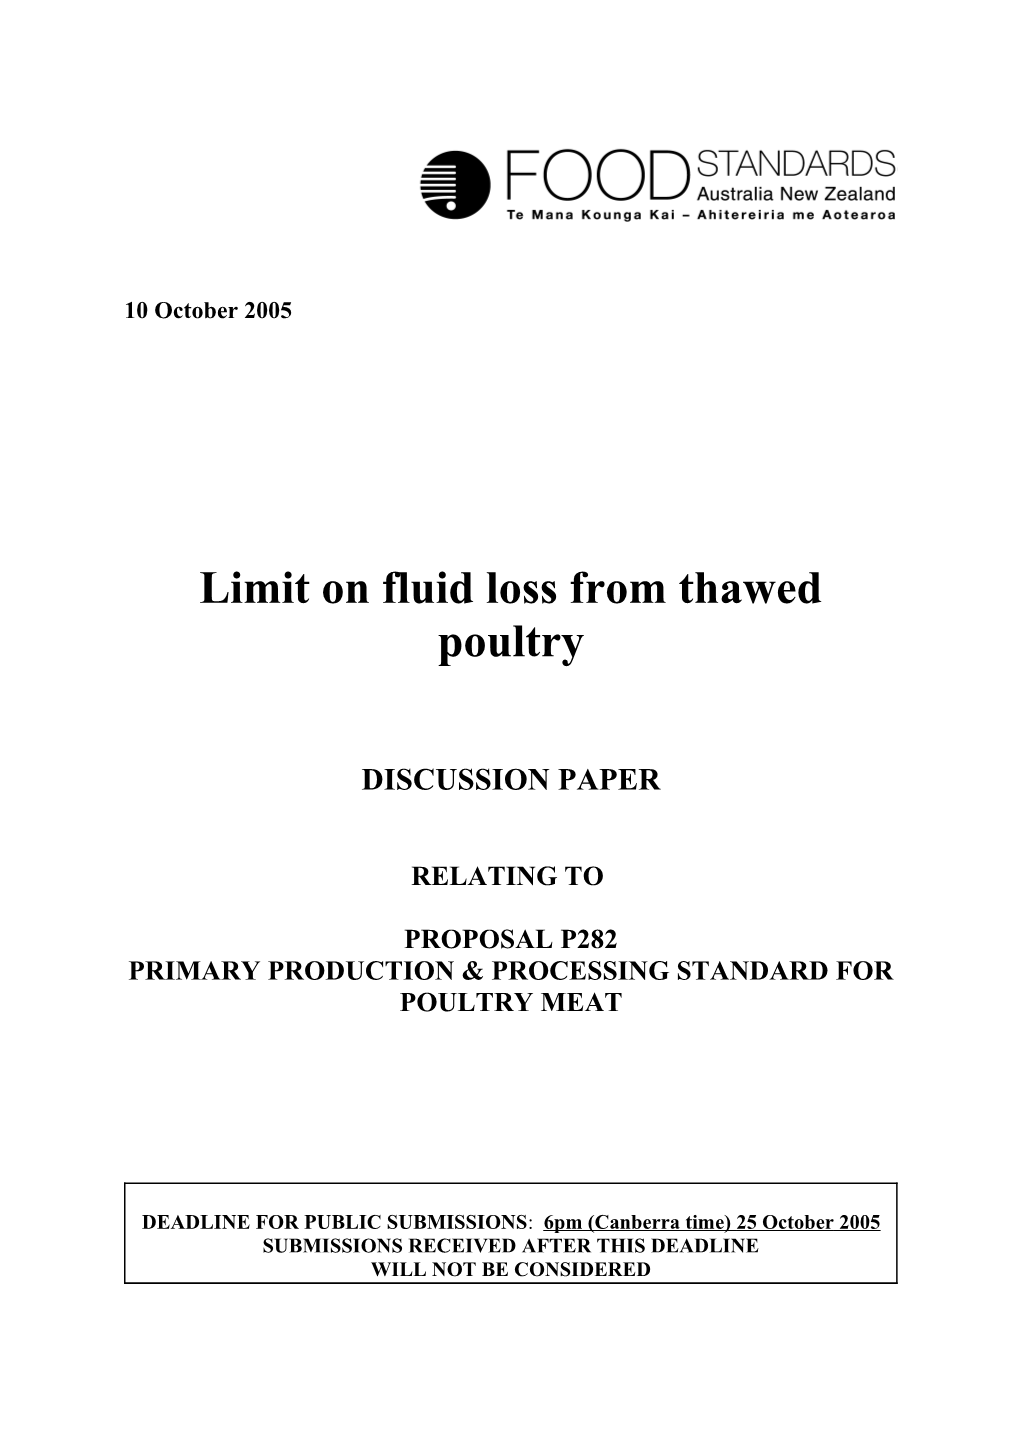 Limit on Fluid Loss from Thawed Poultry- Discussion Paper